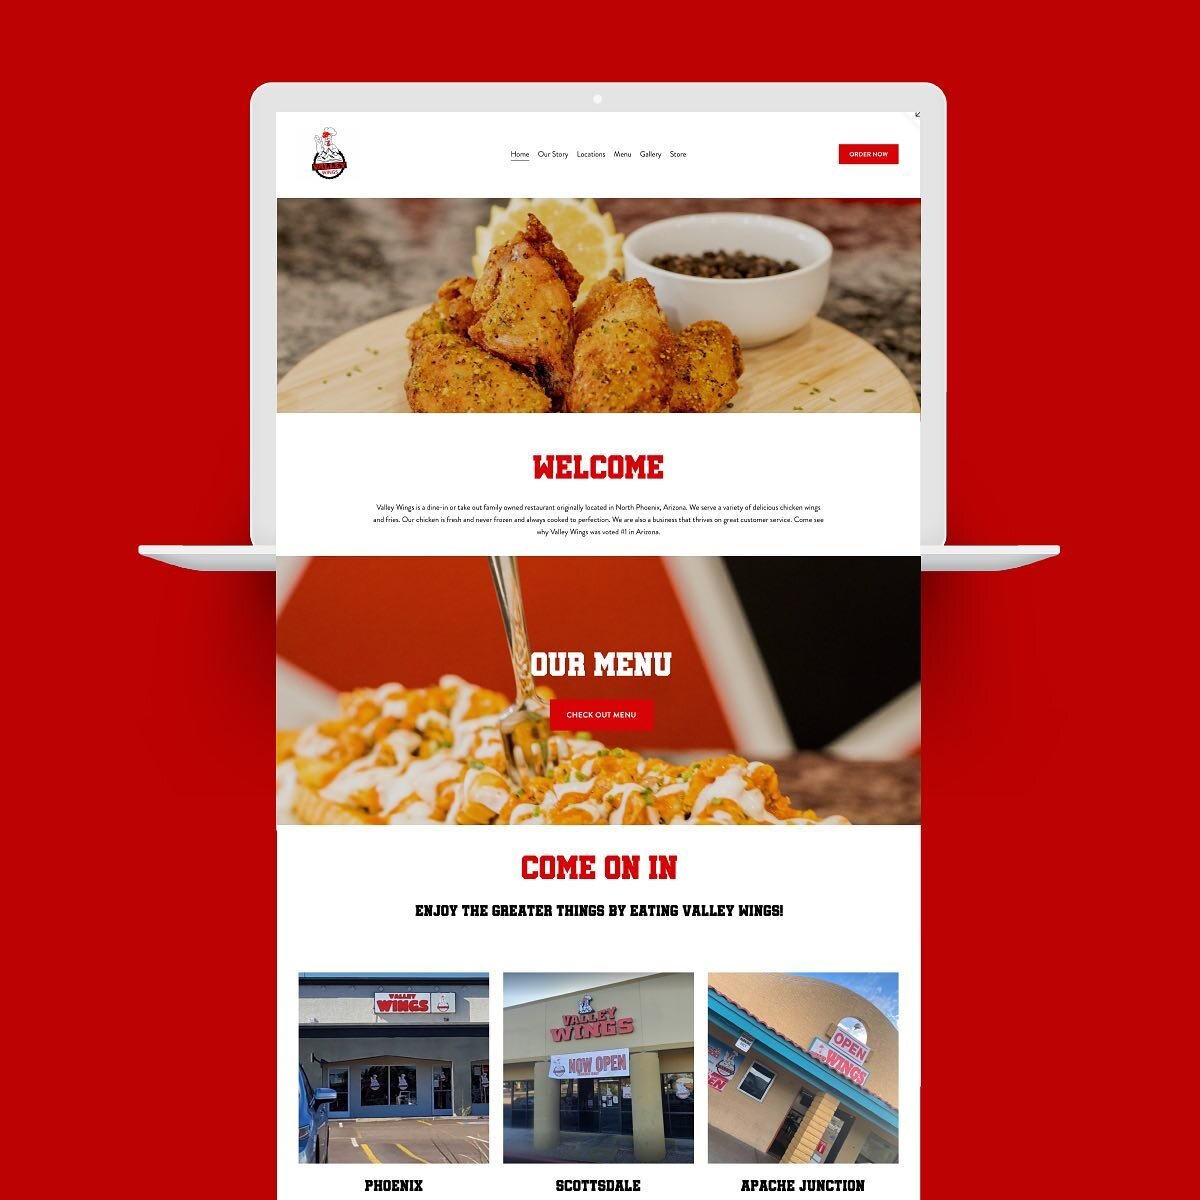 We haven&rsquo;t post on here in a while but we have been working hard! Who doesn&rsquo;t enjoy a great chicken wing?! If you are ever in Arizona, be sure to check out @valleywingsphoenix 🍗 #website #chickenwings #restaurant #blackowned #arizona #sq